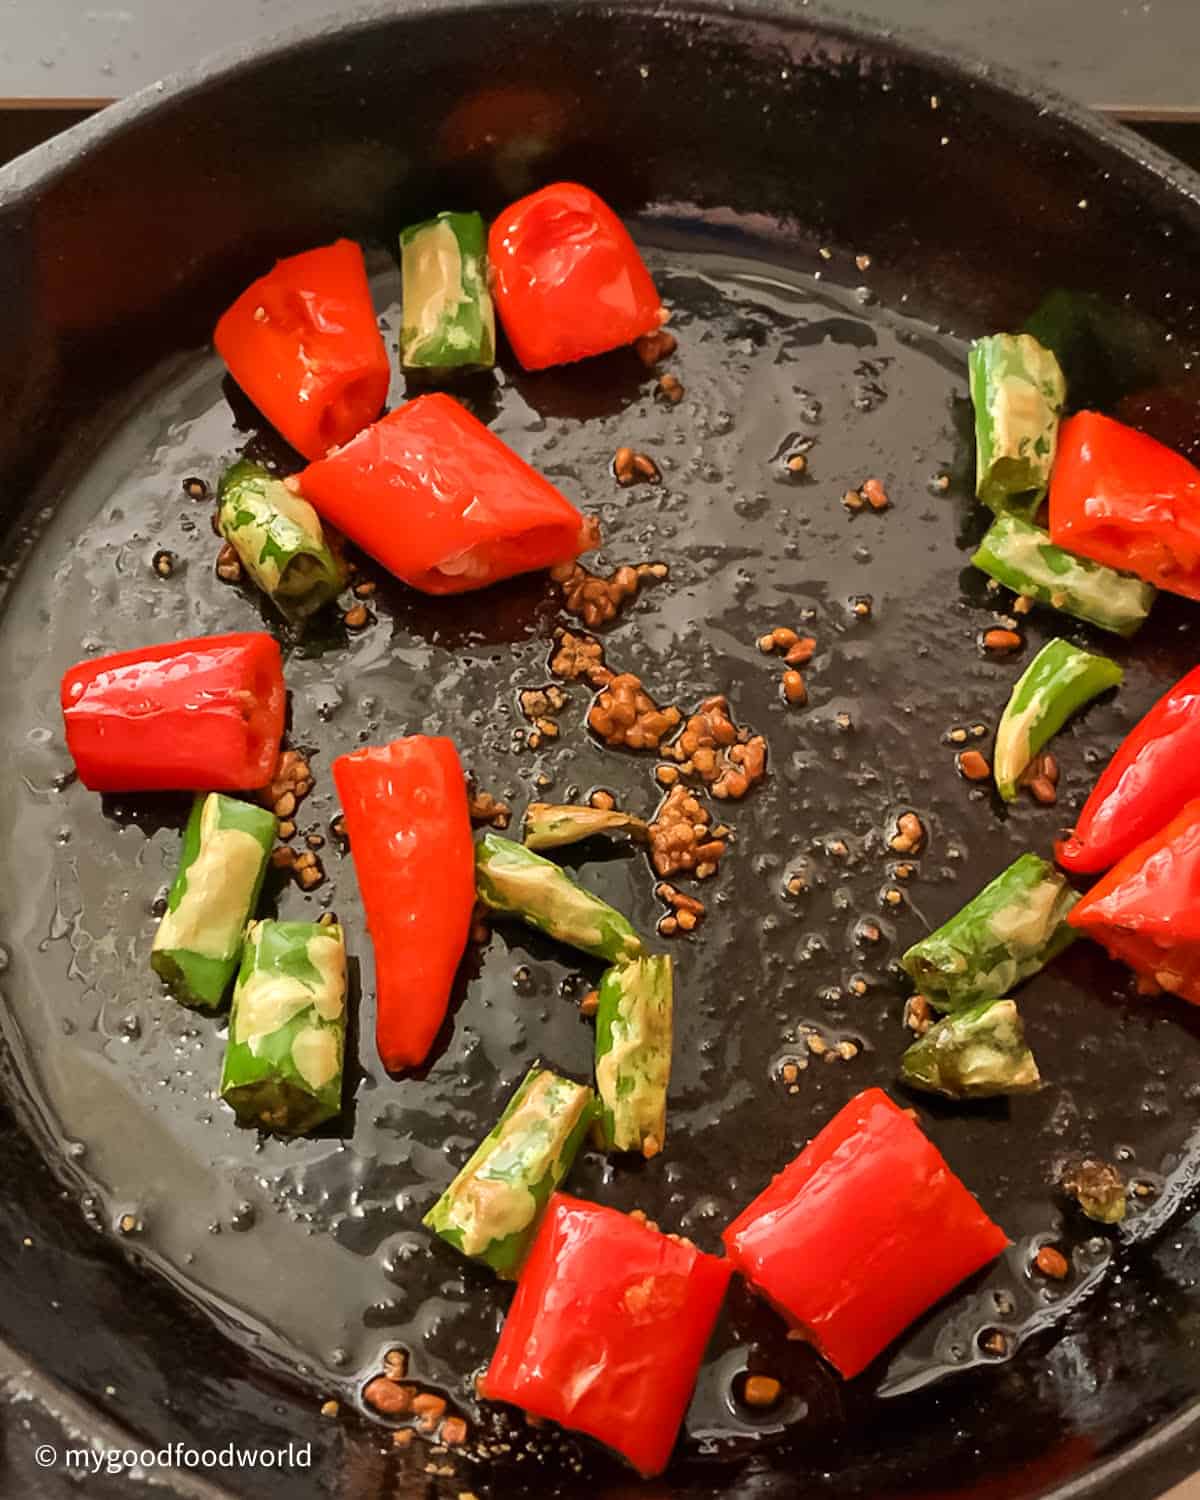 Fresh red and green chilies are frying in some oil and with whole spices in a cast iron pan.